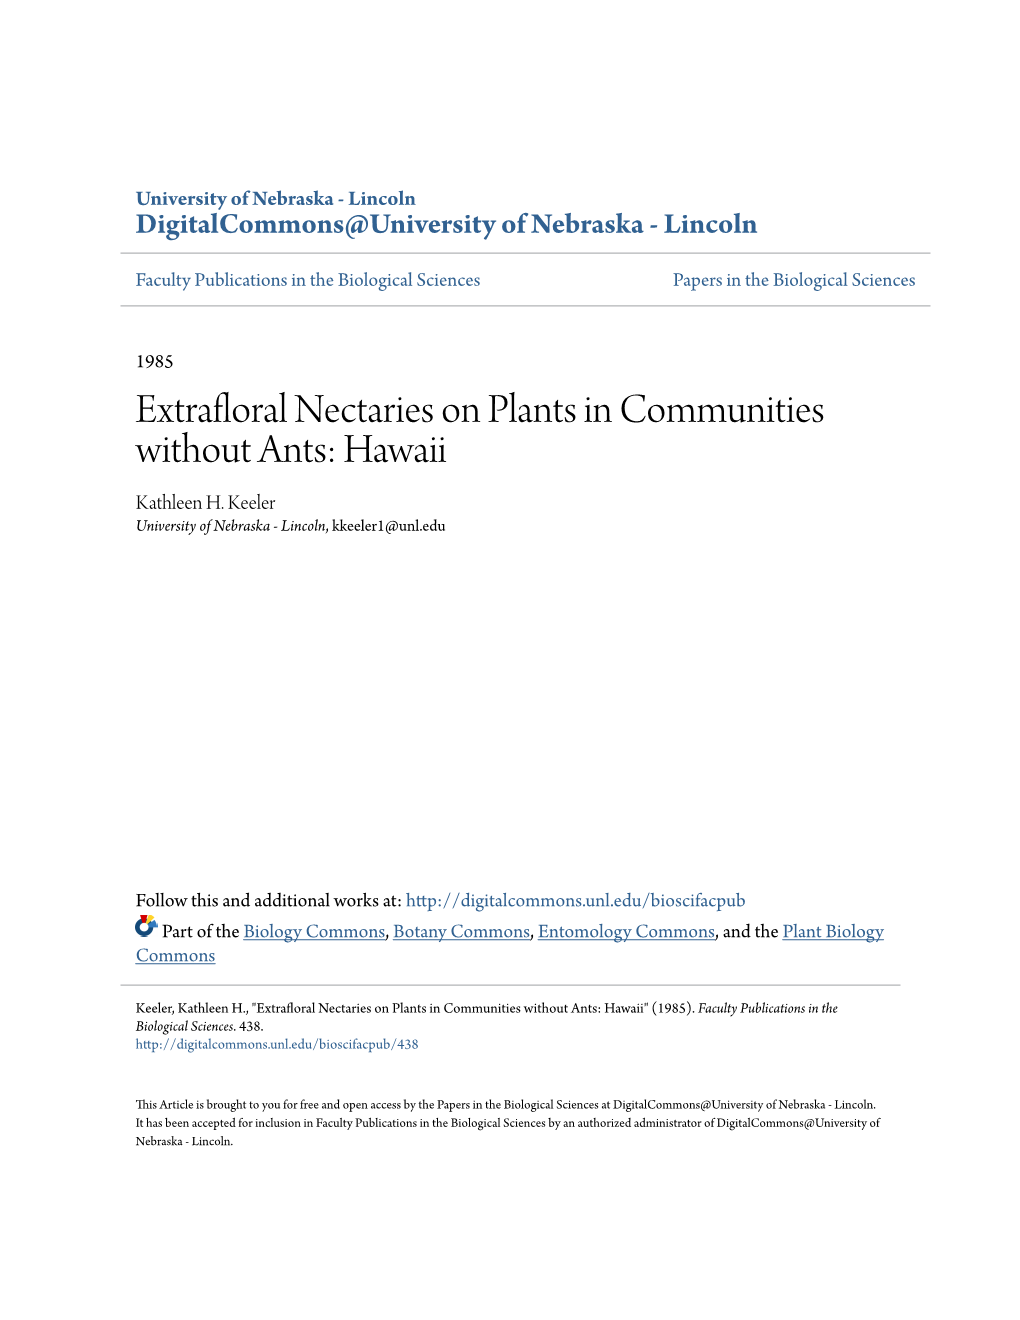 Extrafloral Nectaries on Plants in Communities Without Ants: Hawaii Kathleen H